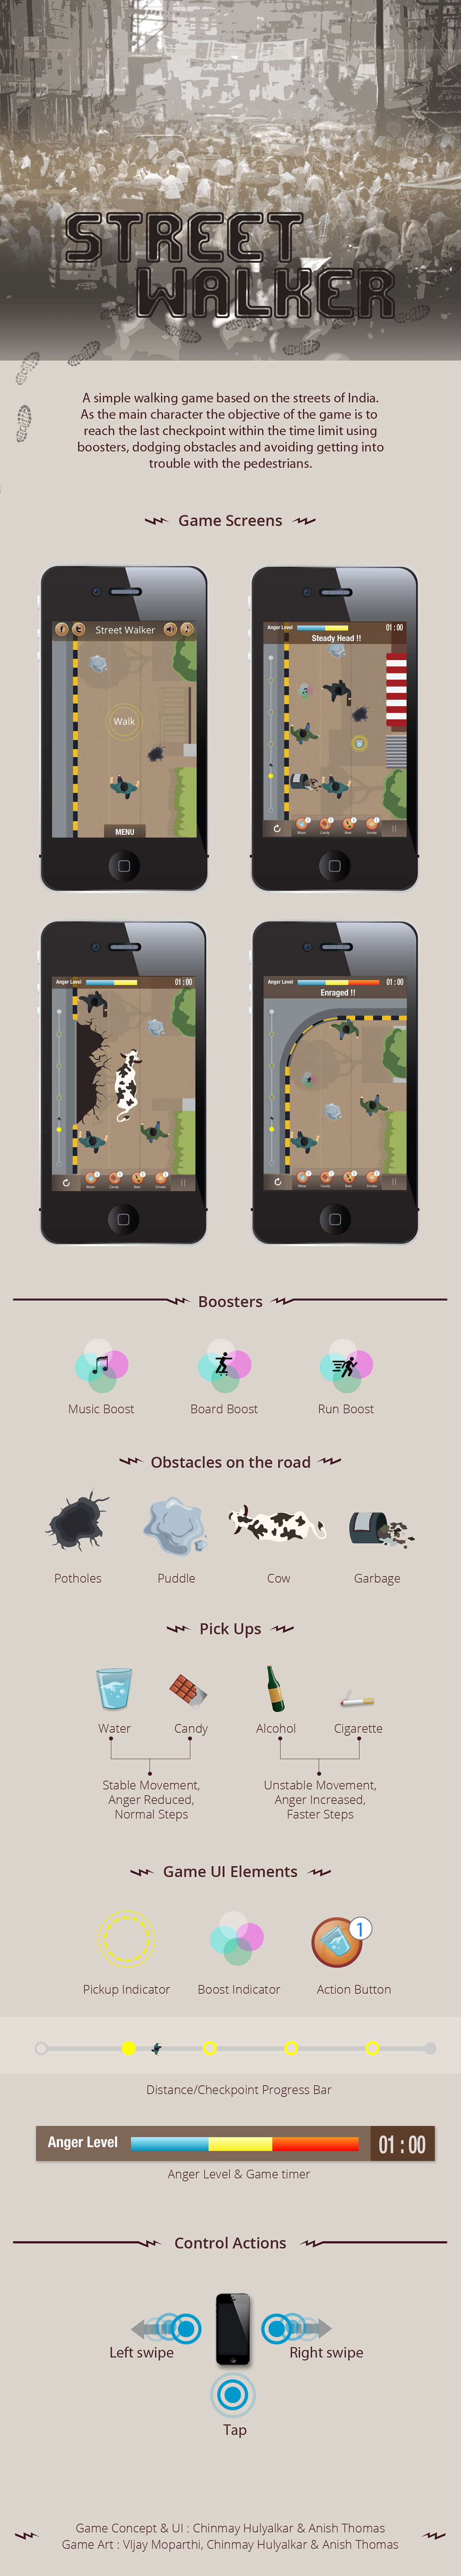 game India design graphics new concept Character road user interface ios iphone ArtDirection user experience